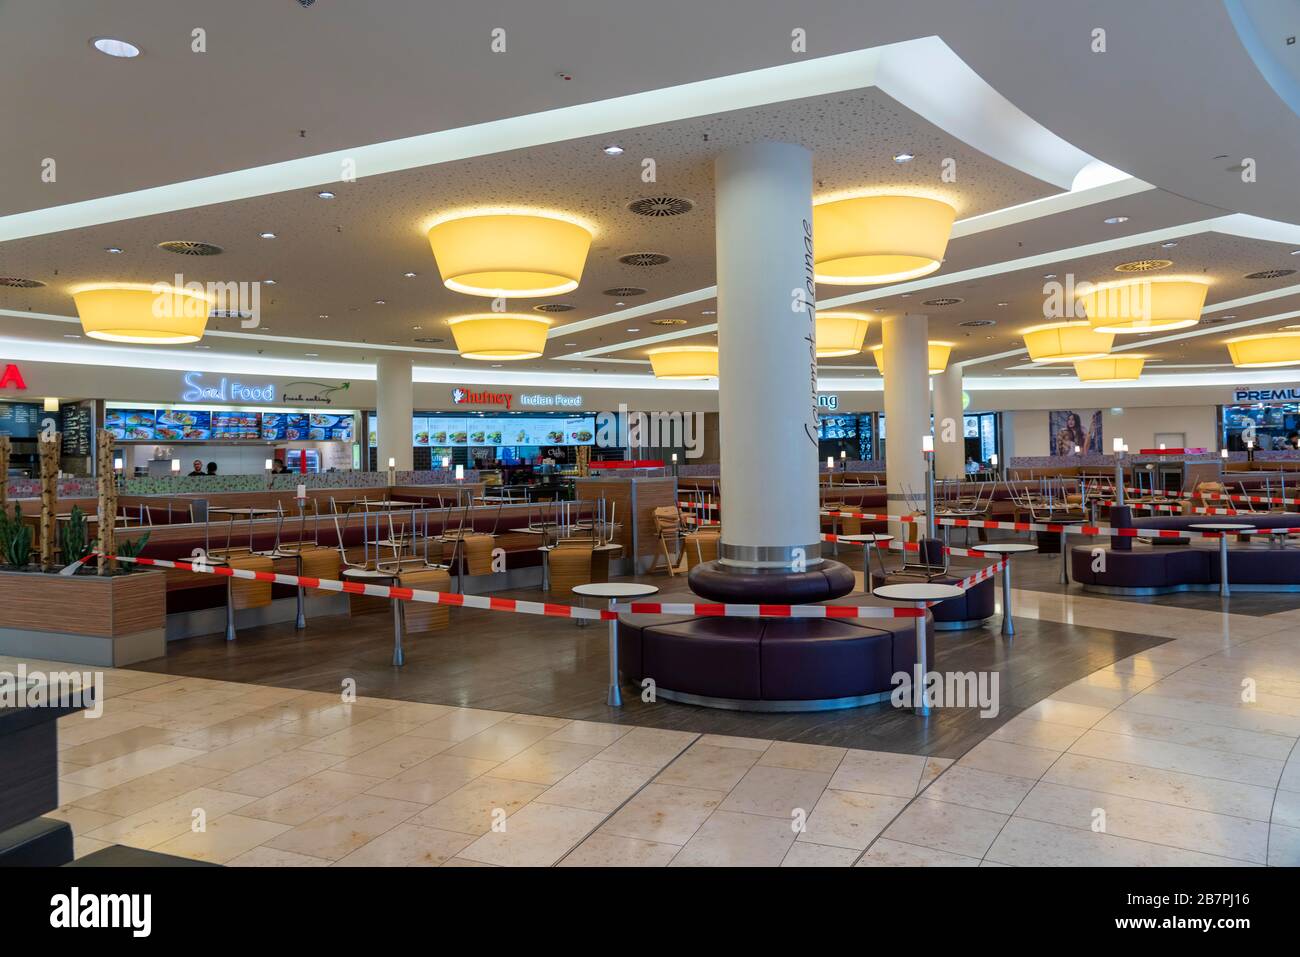 Effects of the coronavirus pandemic in Germany, Essen, Limbecker Platz shopping centre, cordoned-off areas, seating, dining tables for fast food resta Stock Photo